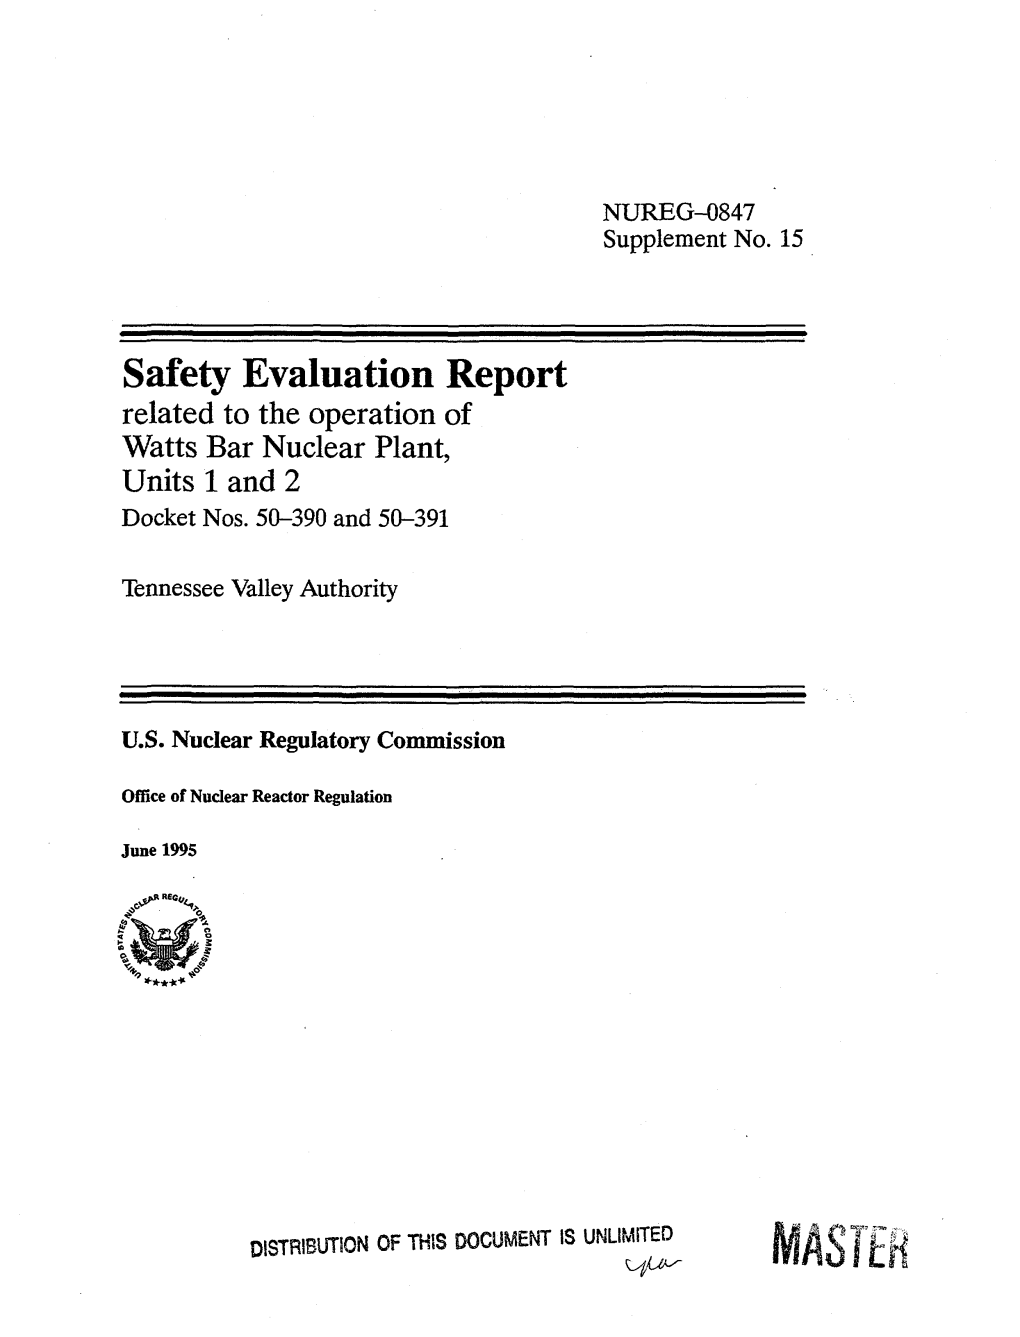 Safety Evaluation Report Related to the Operation of Watts Bar Nuclear Plant, Units 1 and 2